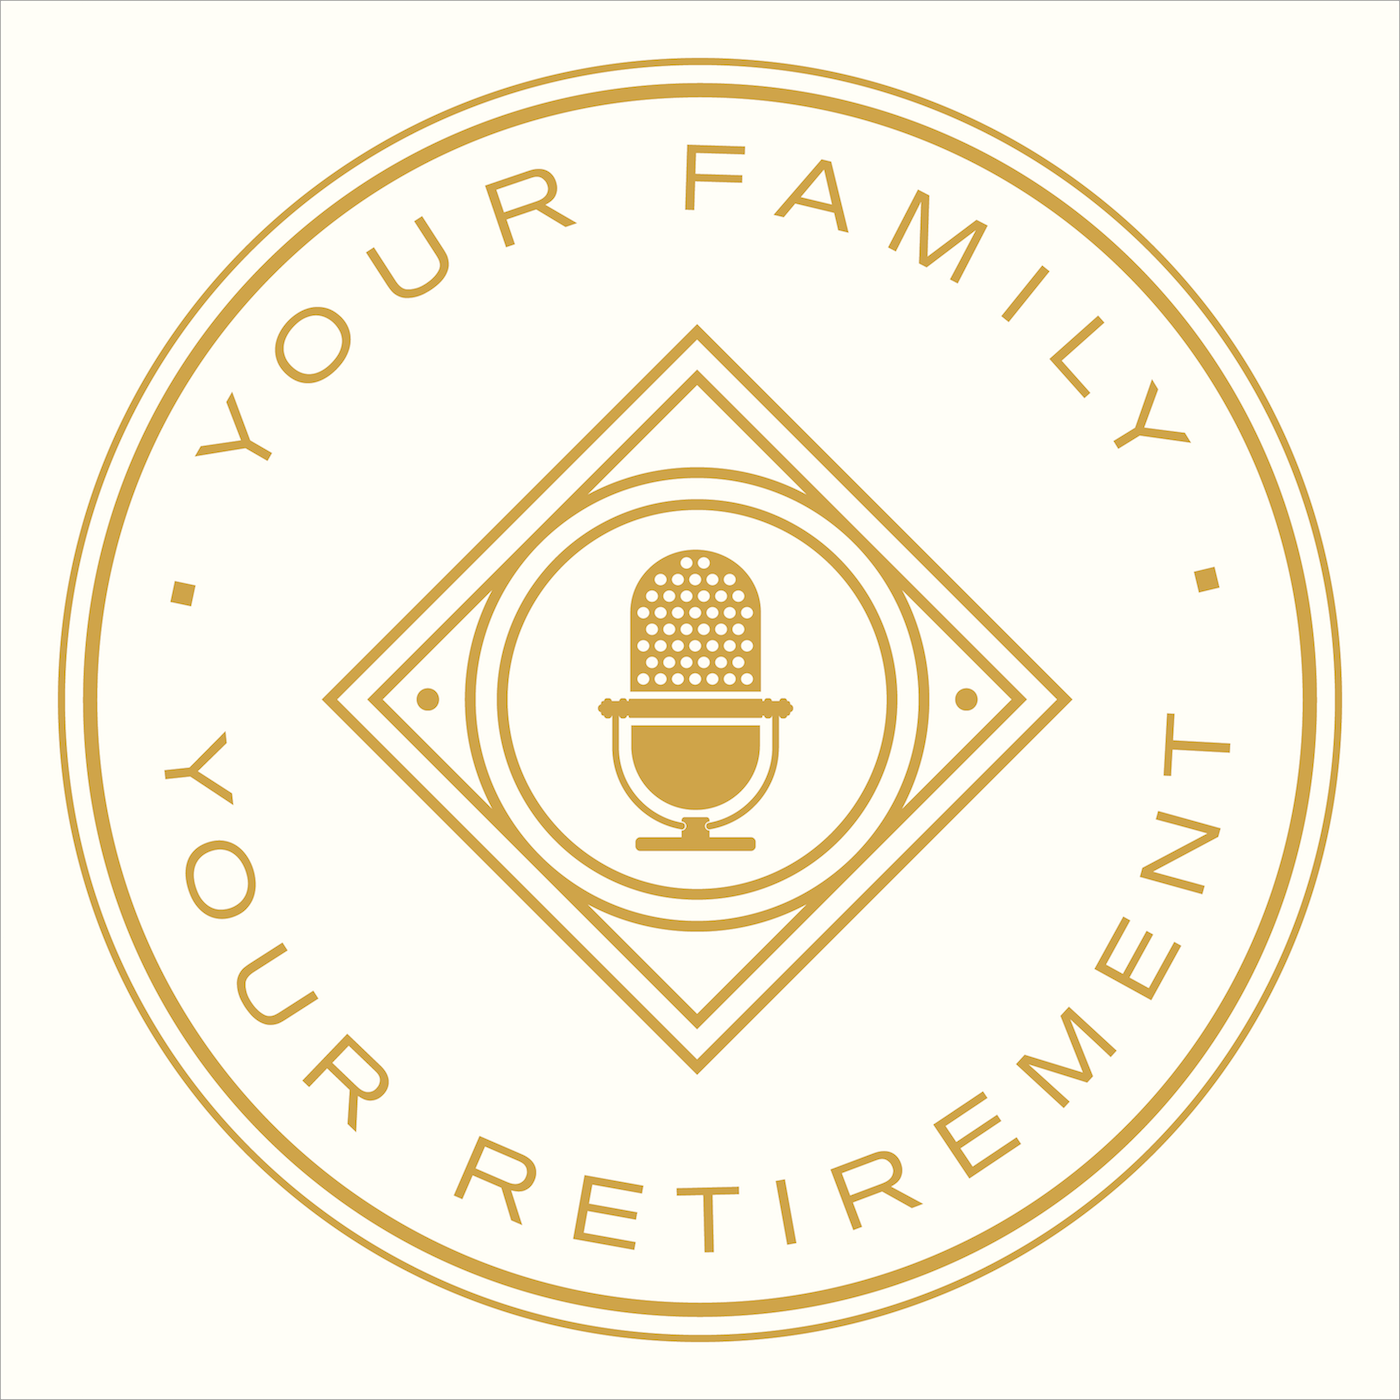 Lowering your RMD taxes in retirement